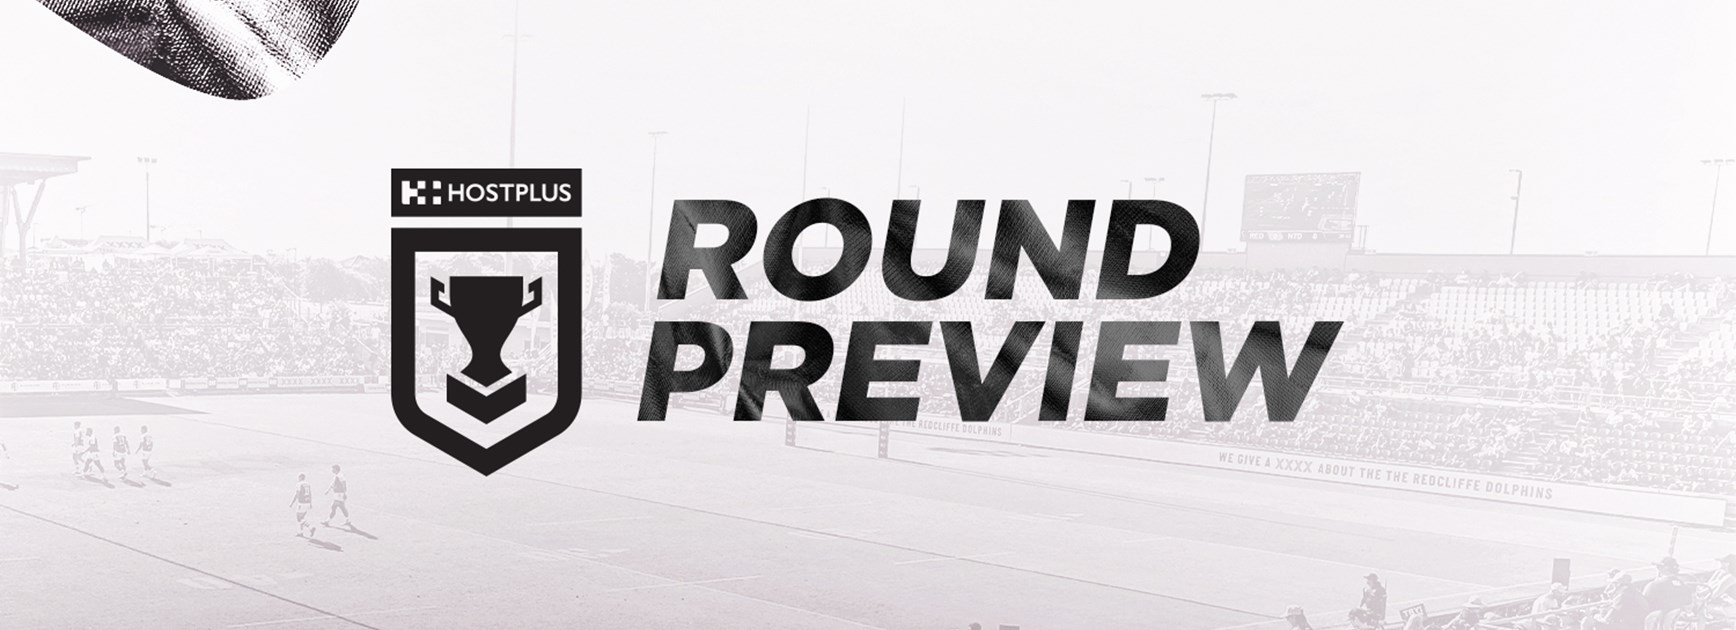 Hostplus Cup Round 10 preview